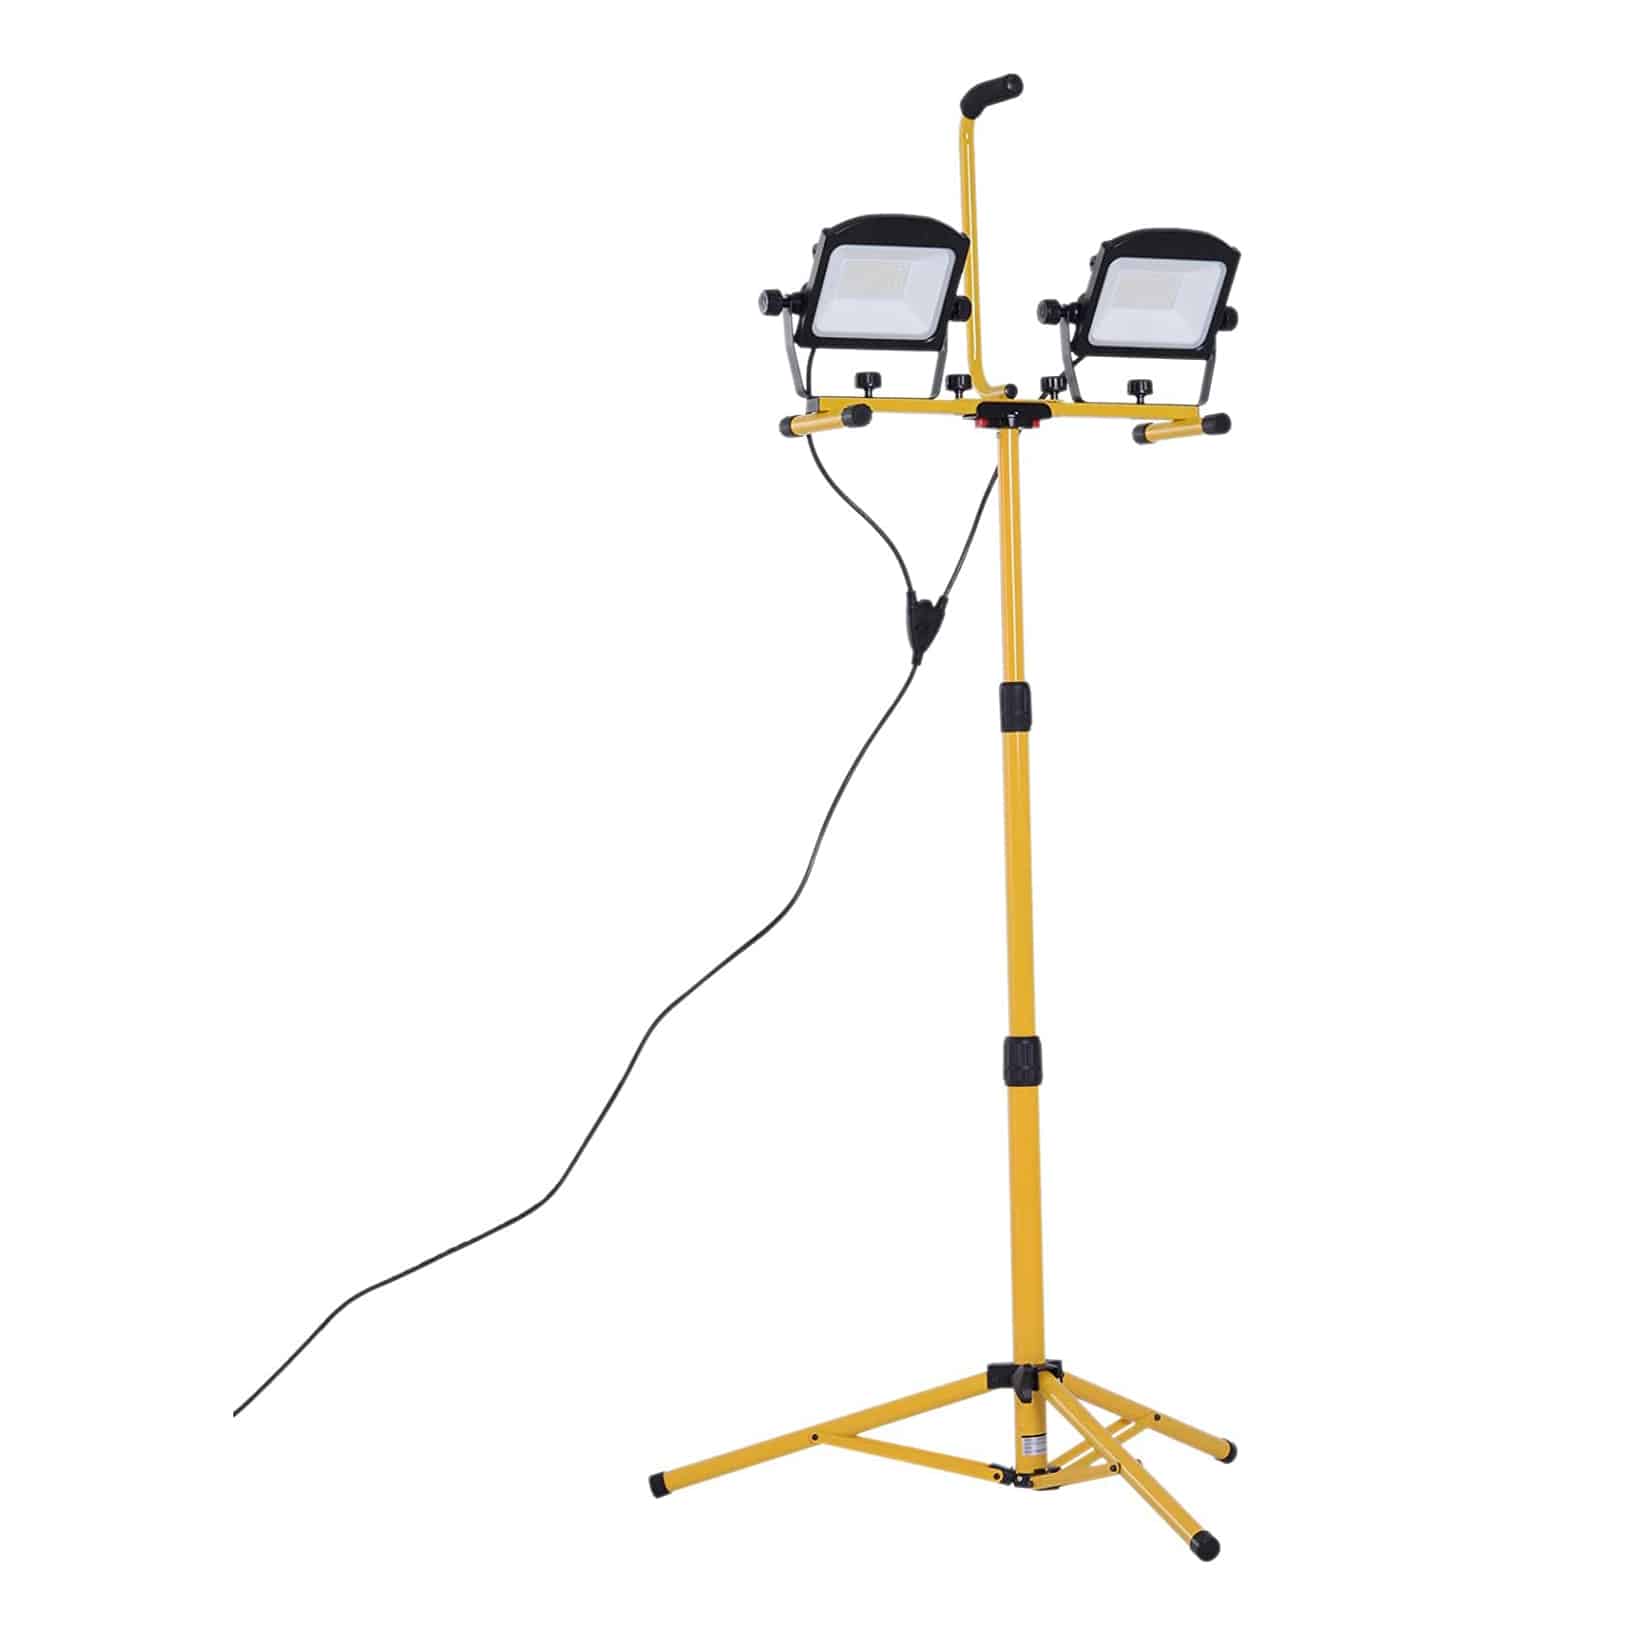 The 10 Best LED Work Lights in 2021 Reviews - Good Selection